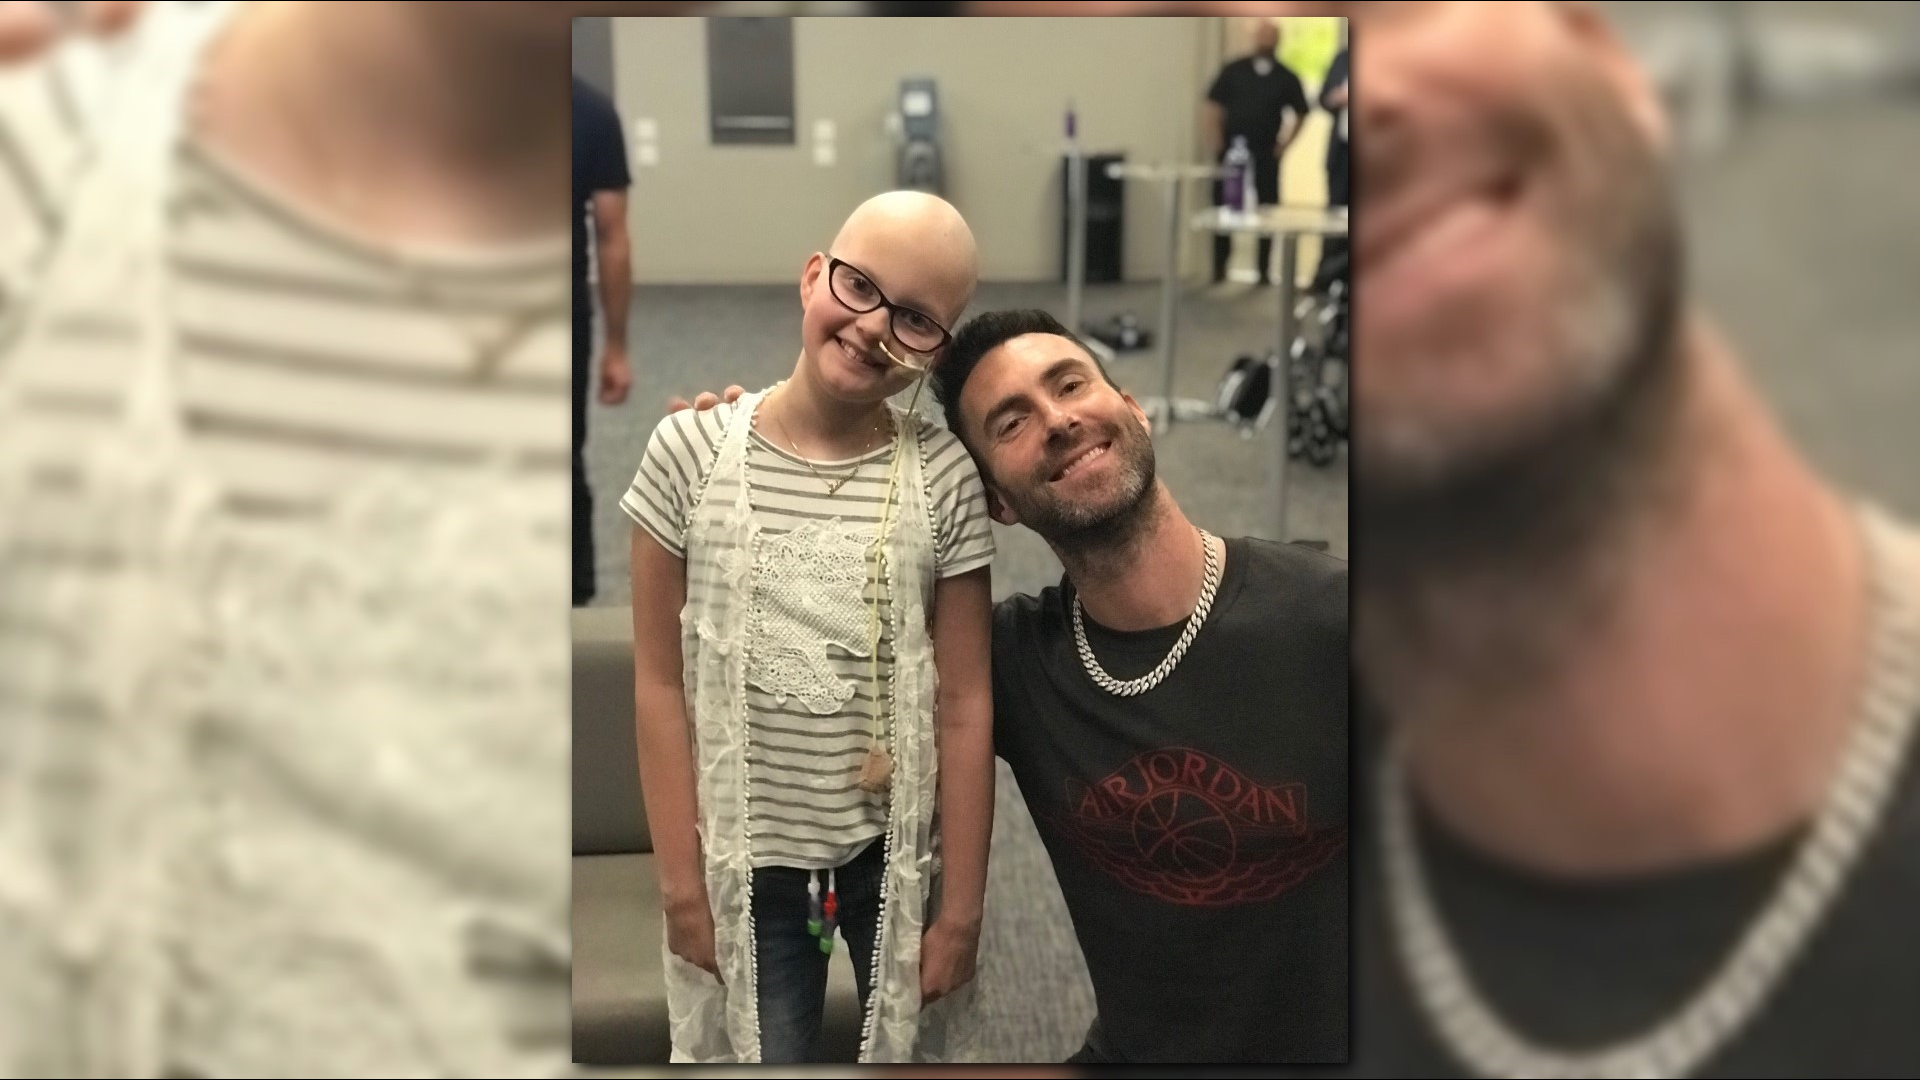 Before the concert, Levine and the rest of the band spent about 15 minutes with Addison and her friends. Salazar says he ordered them pizza and took several photos with the girls and their families.